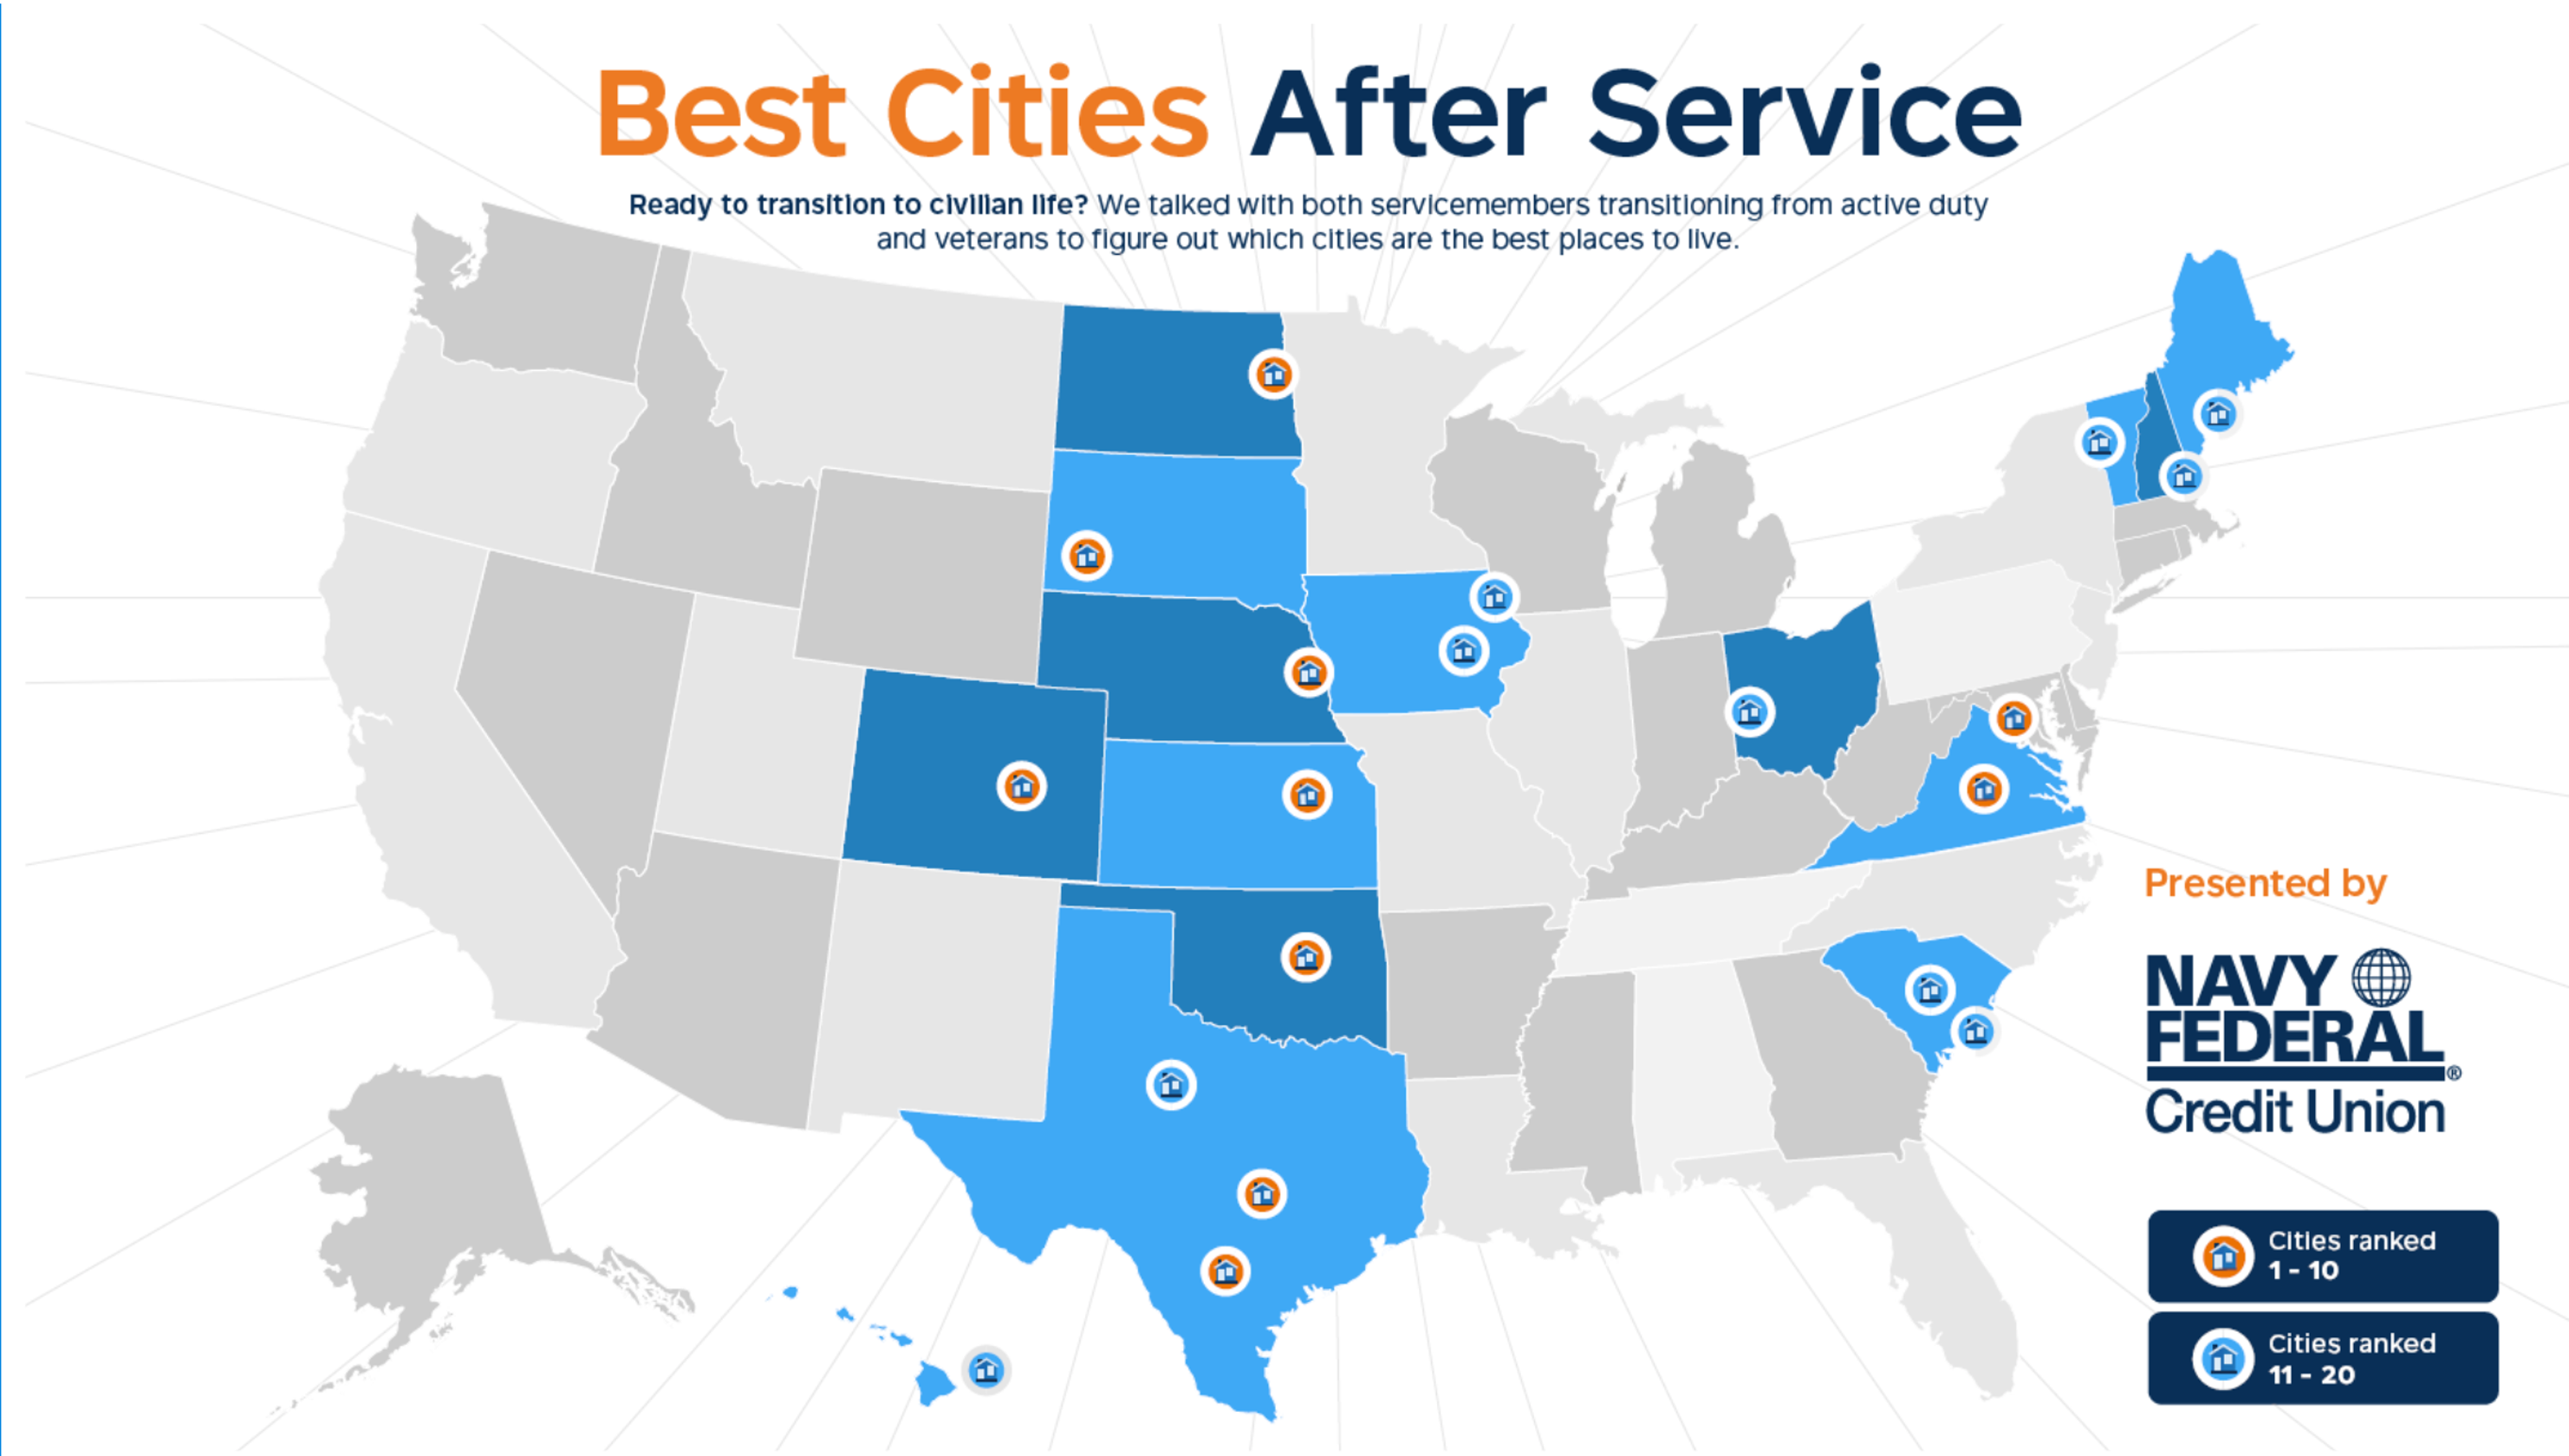 Best cities for vets: Study ranks locations for those leaving service